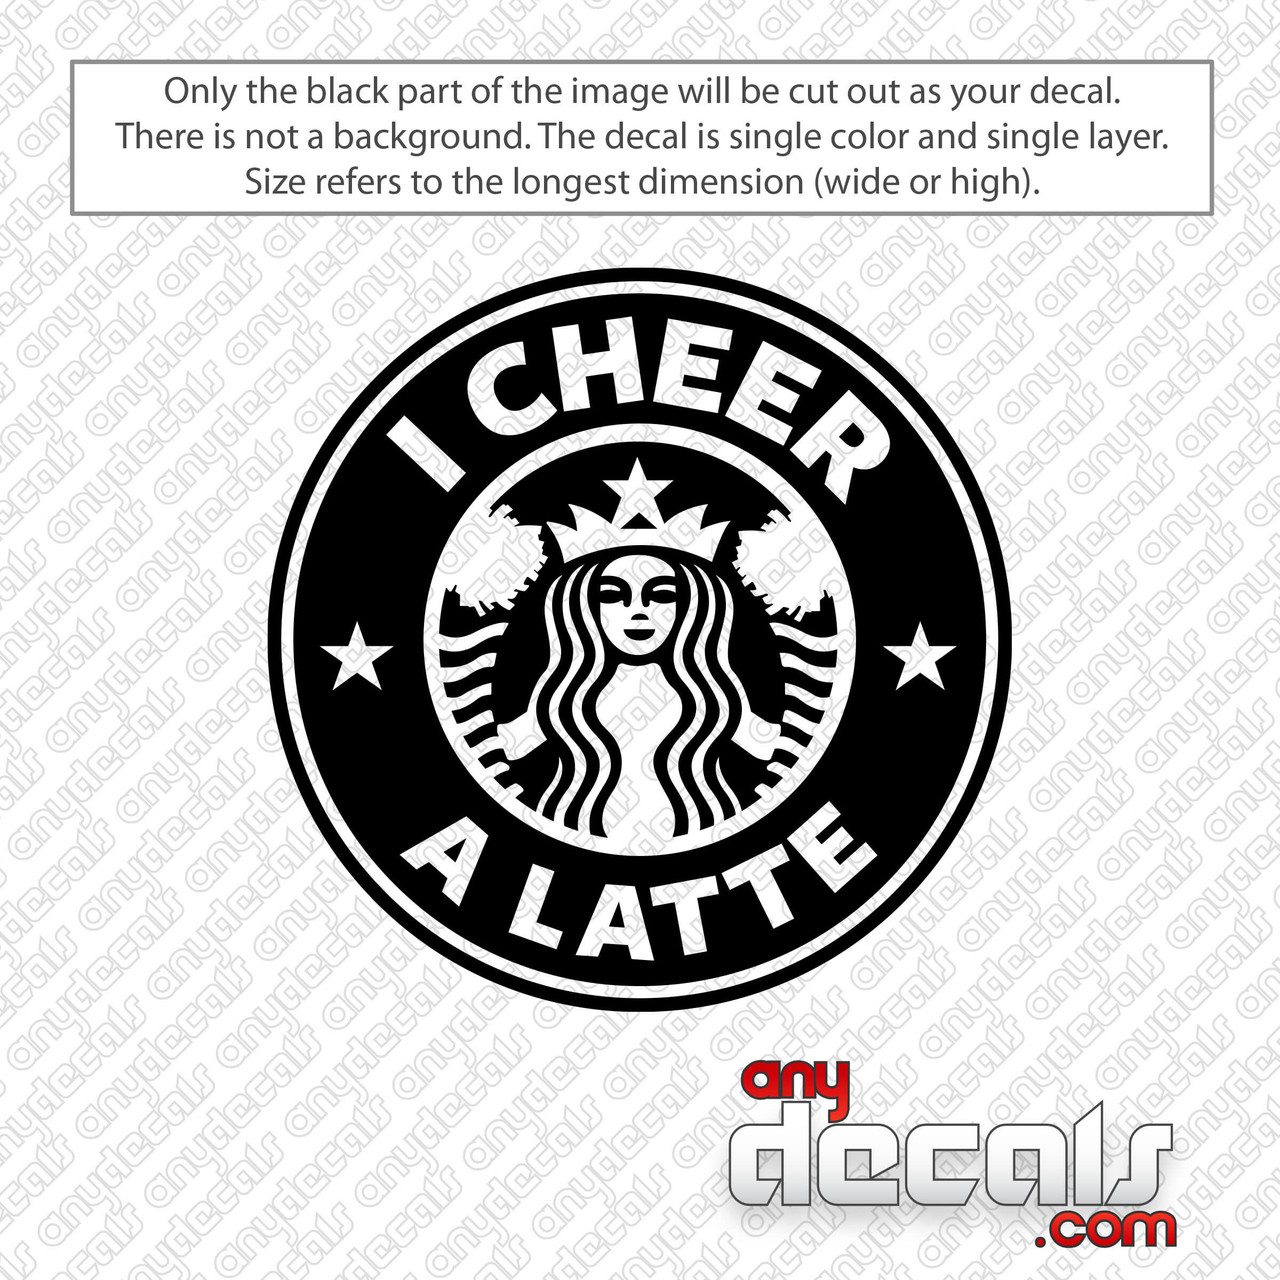 https://cdn11.bigcommerce.com/s-df97c/images/stencil/1280x1280/products/1762/2784/i-cheer-a-latte-starbucks-decal-sticker__60409.1630212308.jpg?c=2?imbypass=on